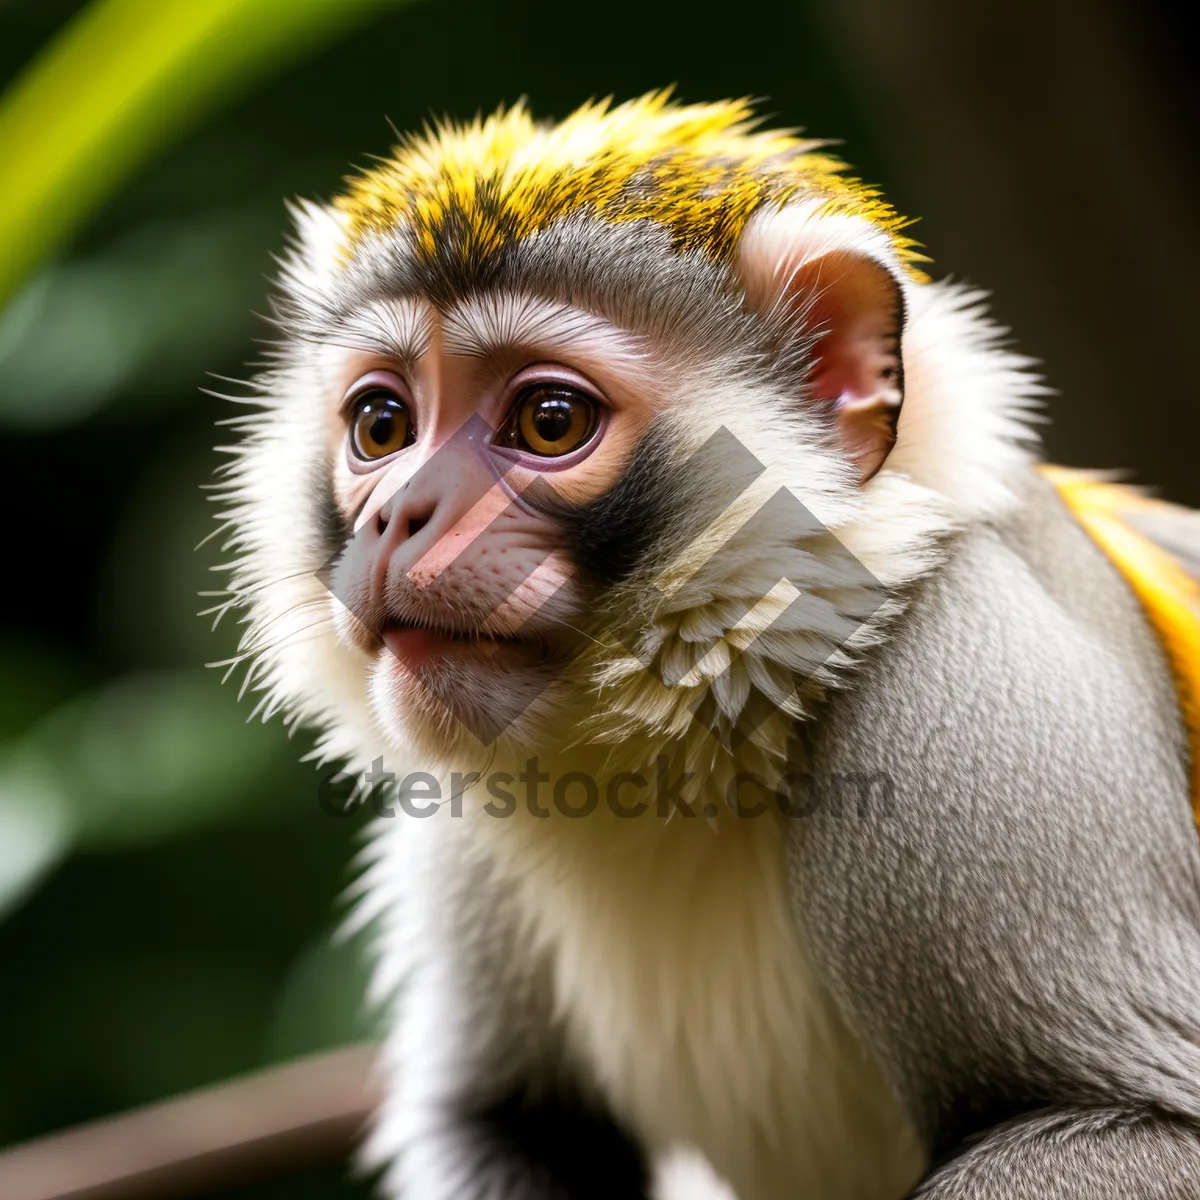 Picture of Playful Macaque Monkey in Jungle Habitat